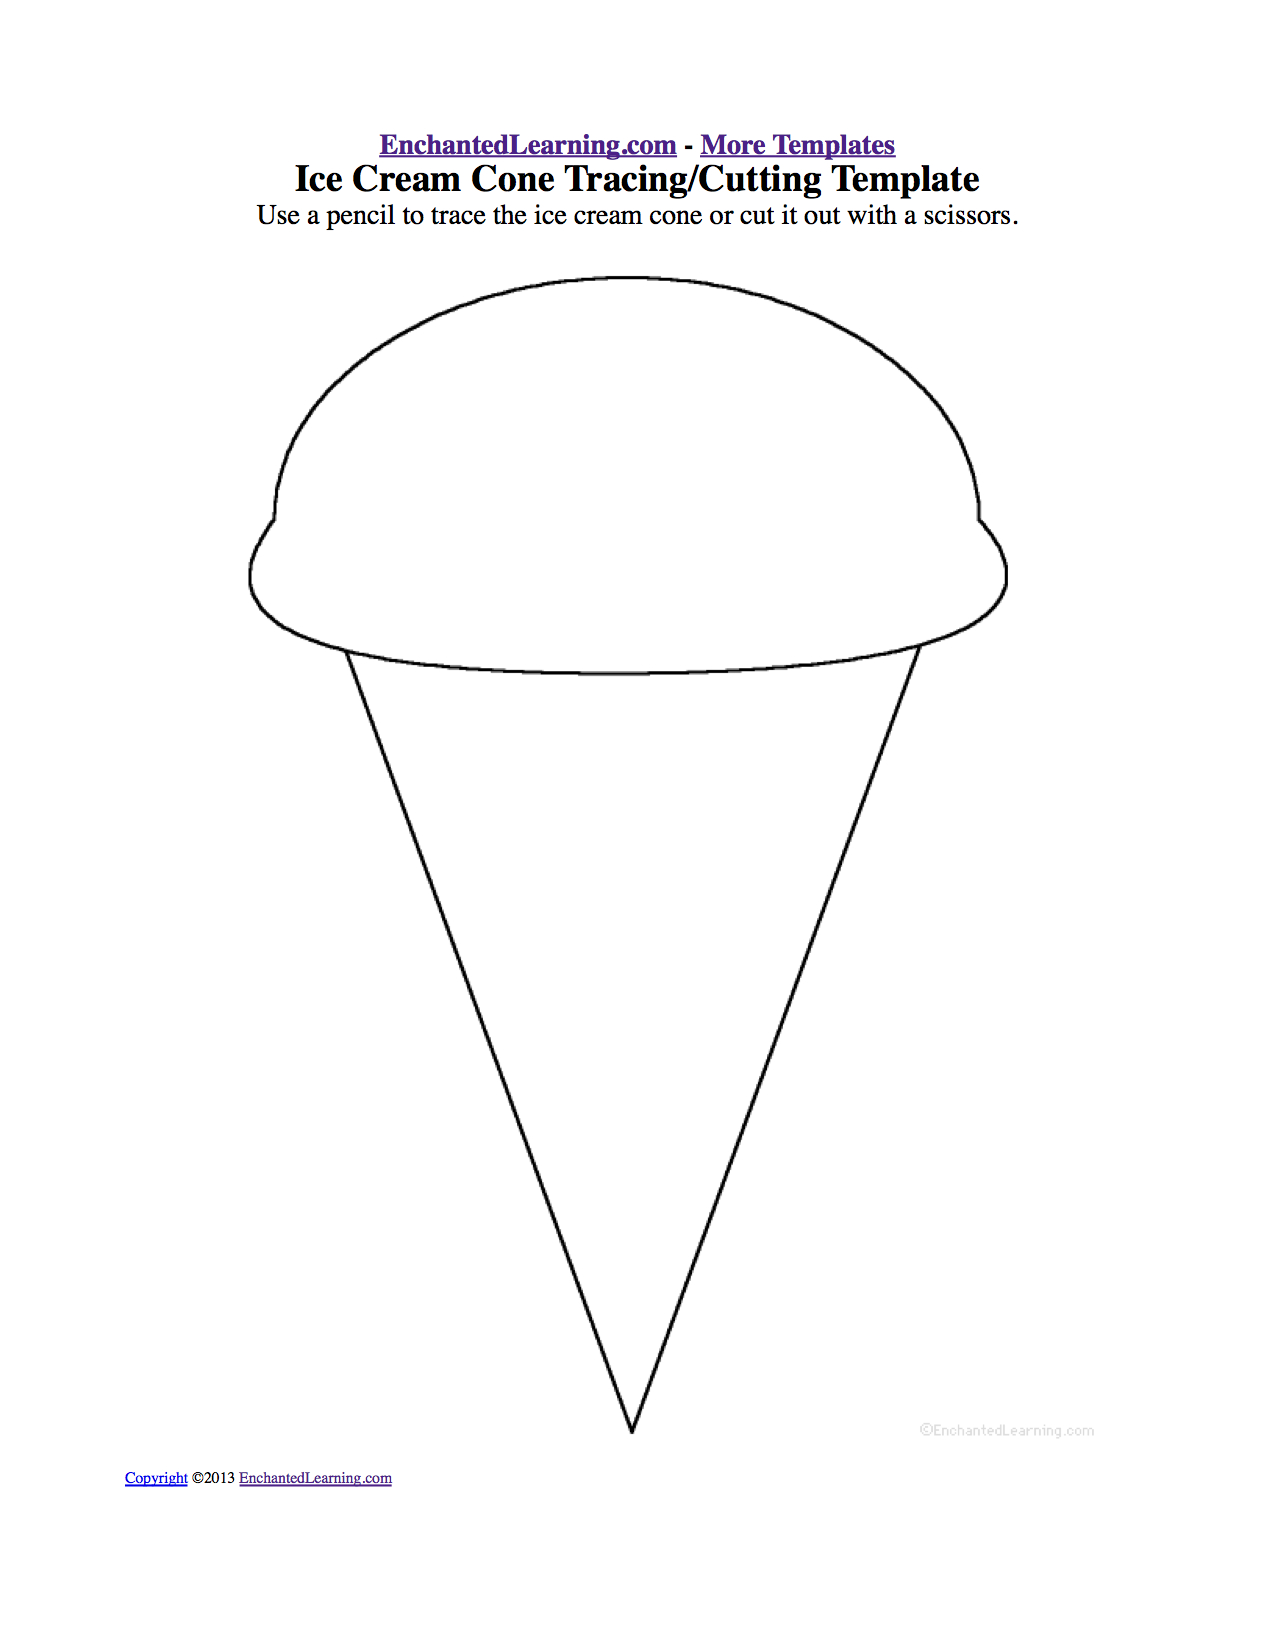 Ice Cream Theme Page At Enchantedlearning - Ice Cream Cone Template Free Printable